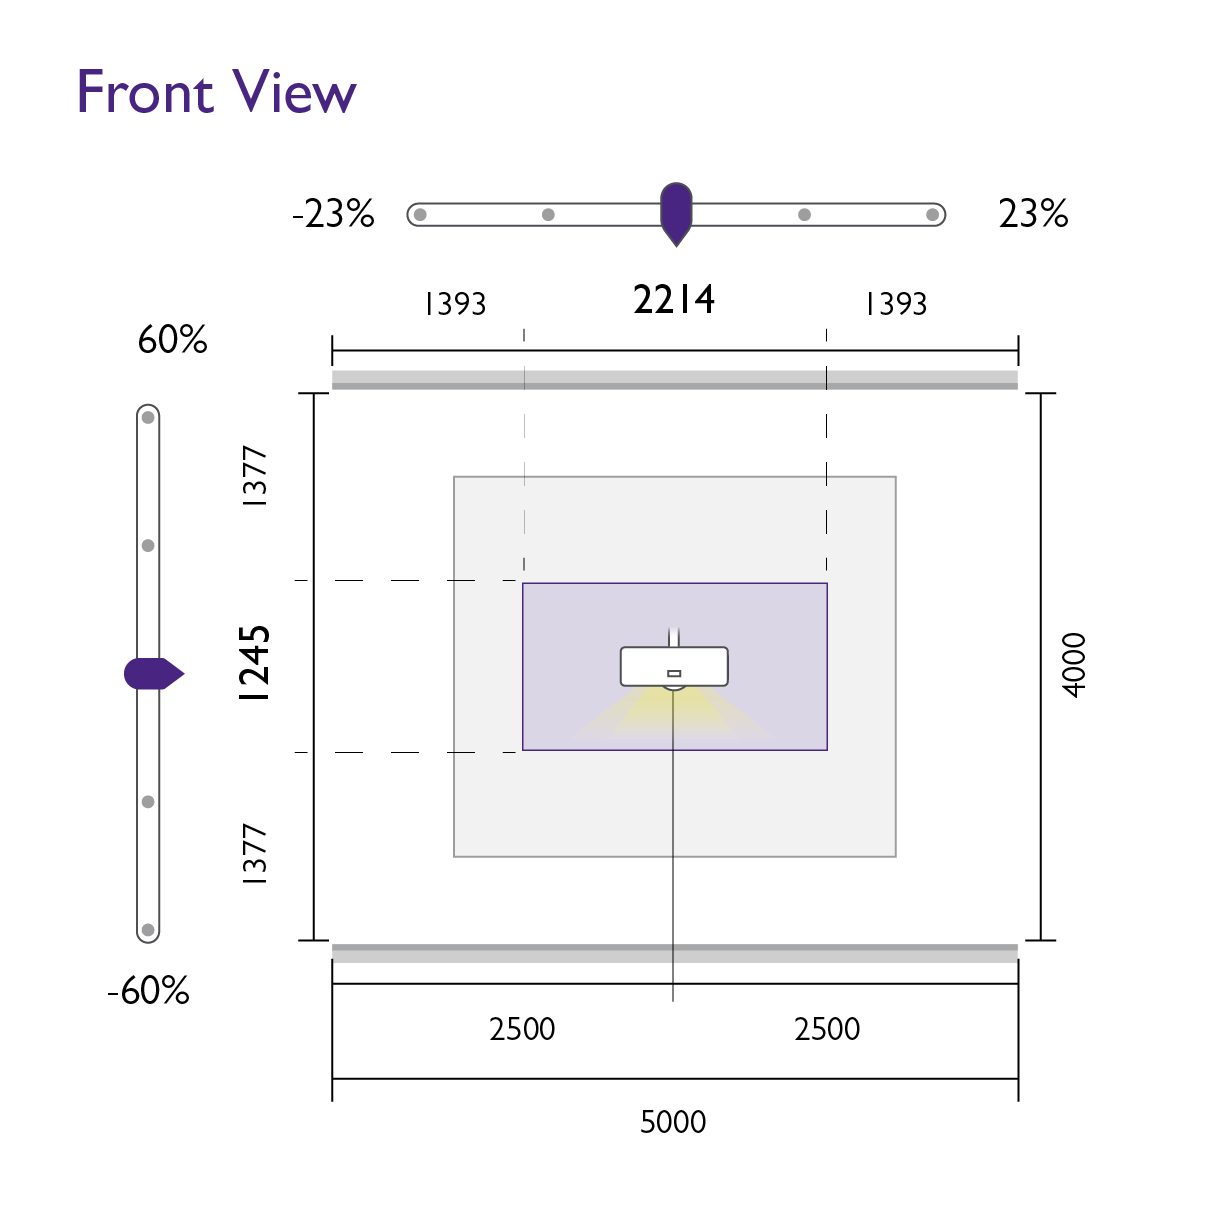 For projector projecting a 100-inch image as an example, its vertical shift has a range of 60% of the height of the image while the horizontal shift has a range of 23%( 23% of the image width).